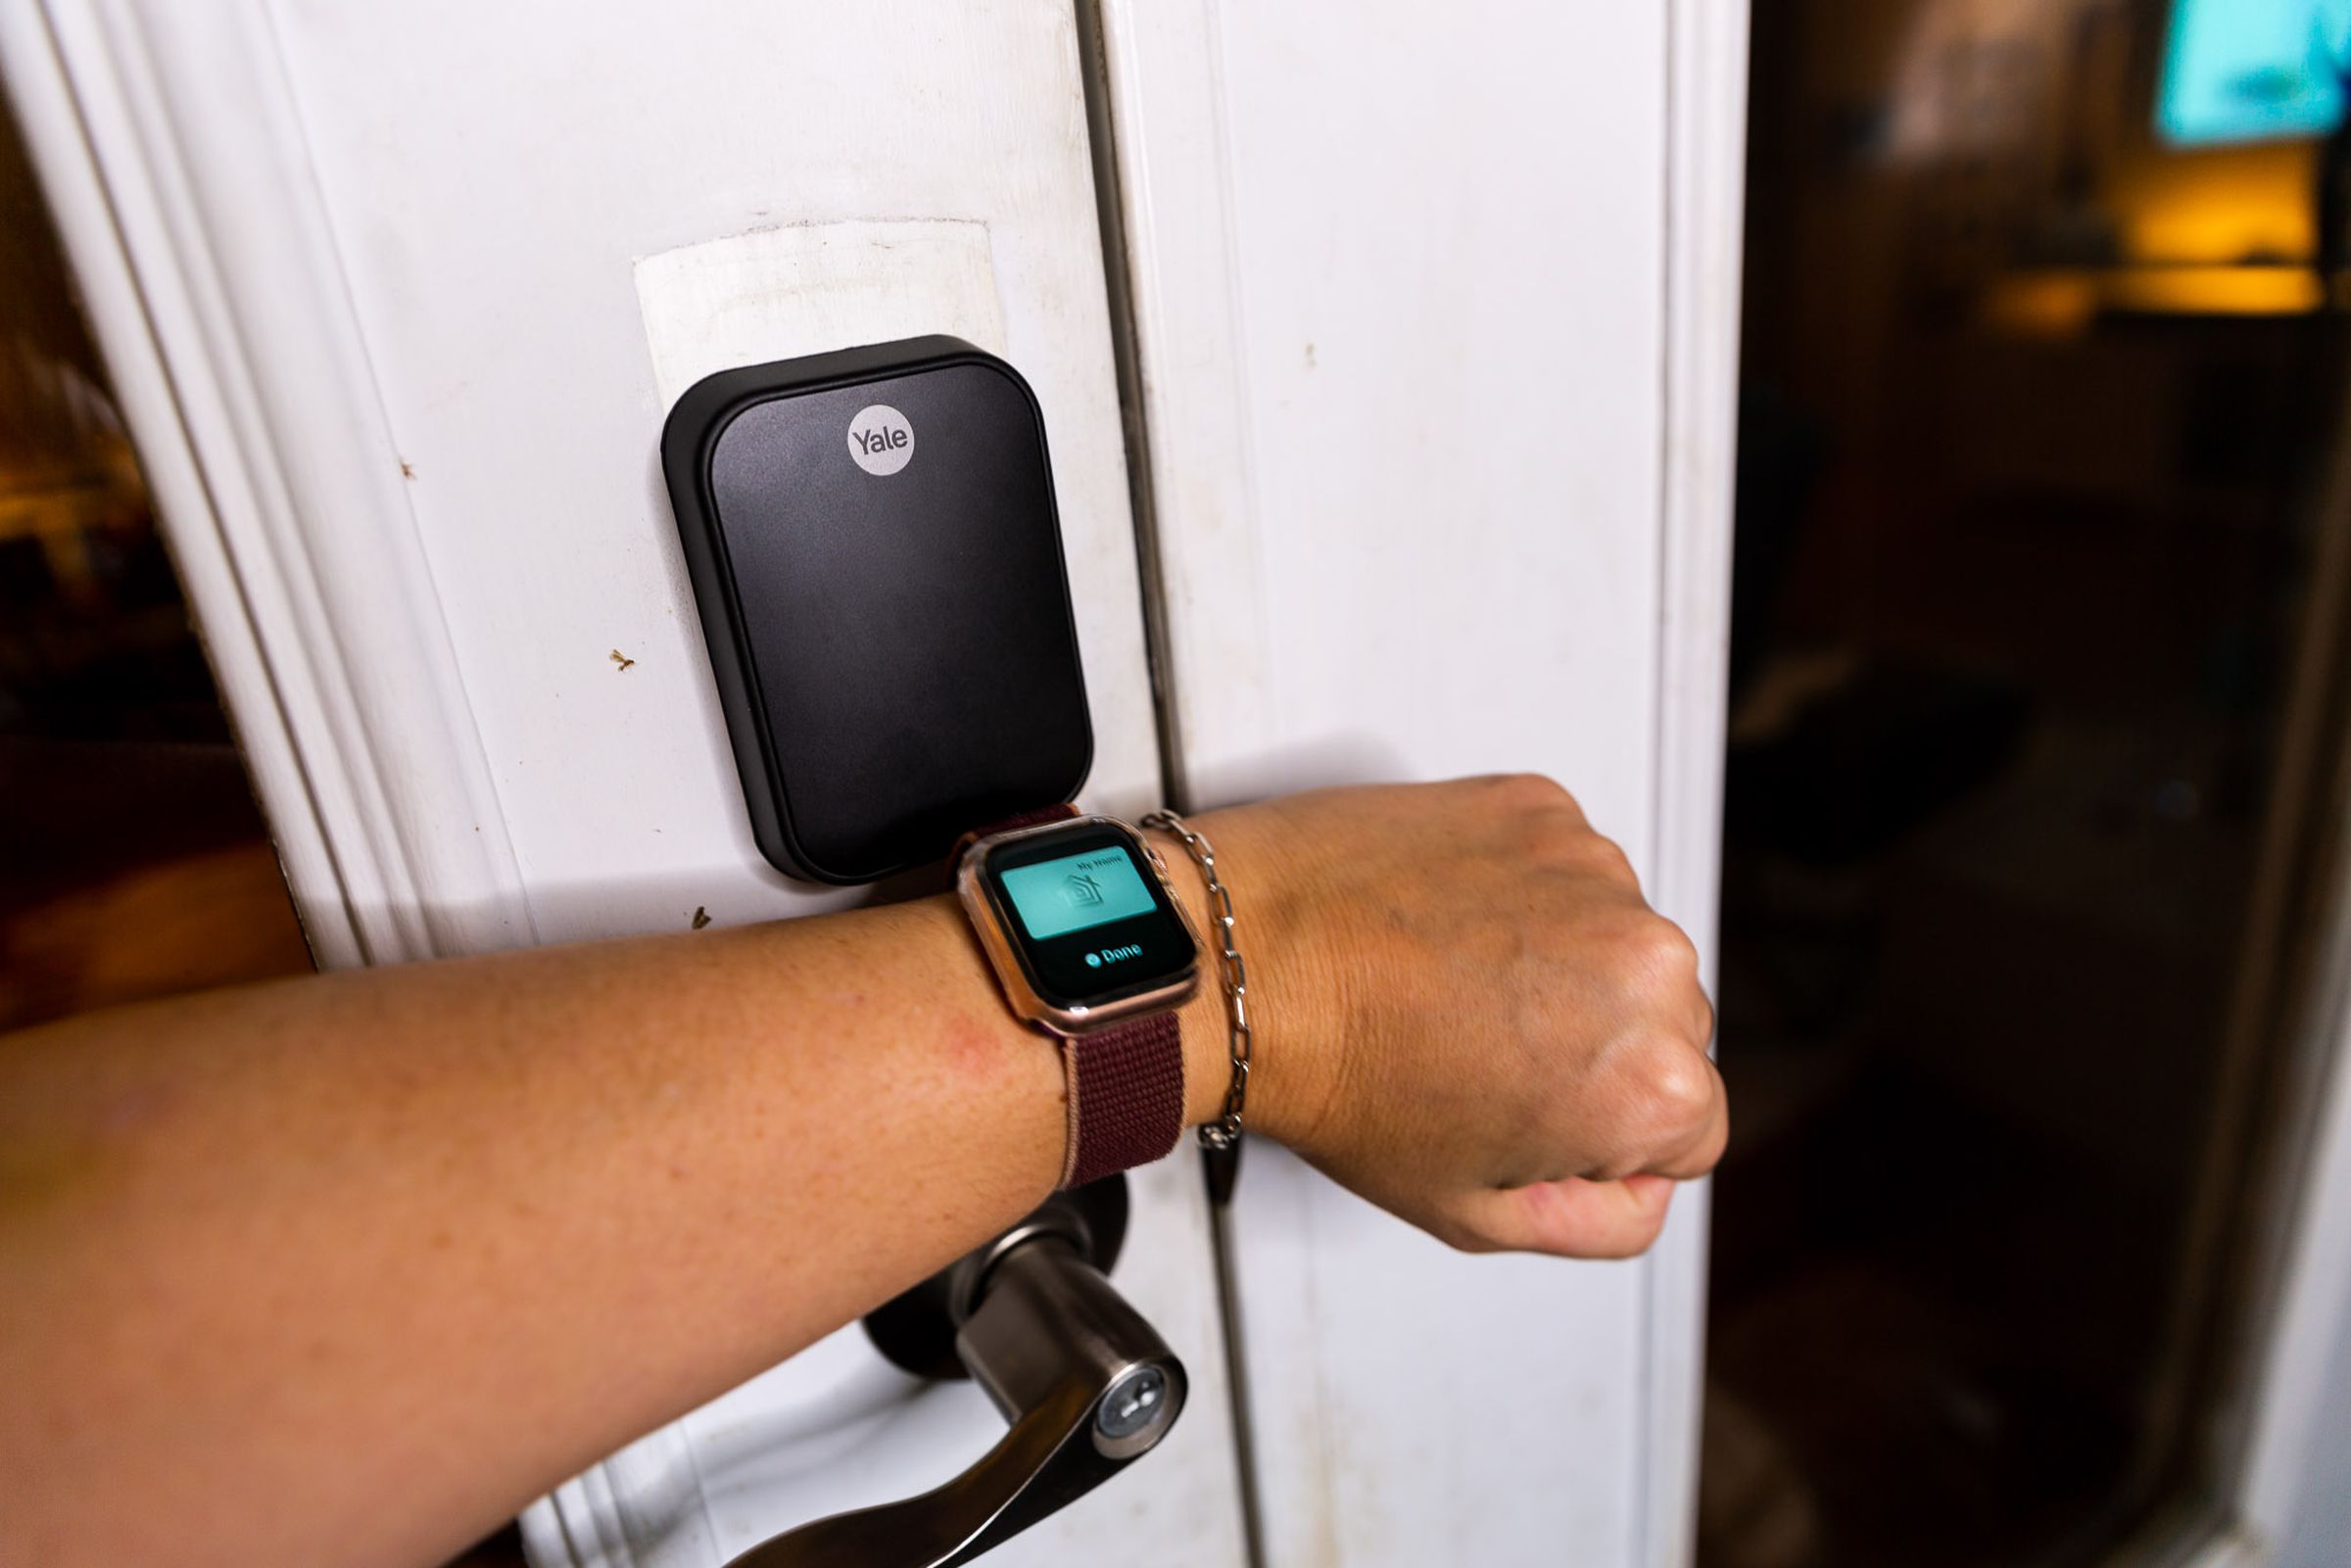 Unlocking the Home Key-enabled Assure 2 Plus with my Apple Watch was very fast.